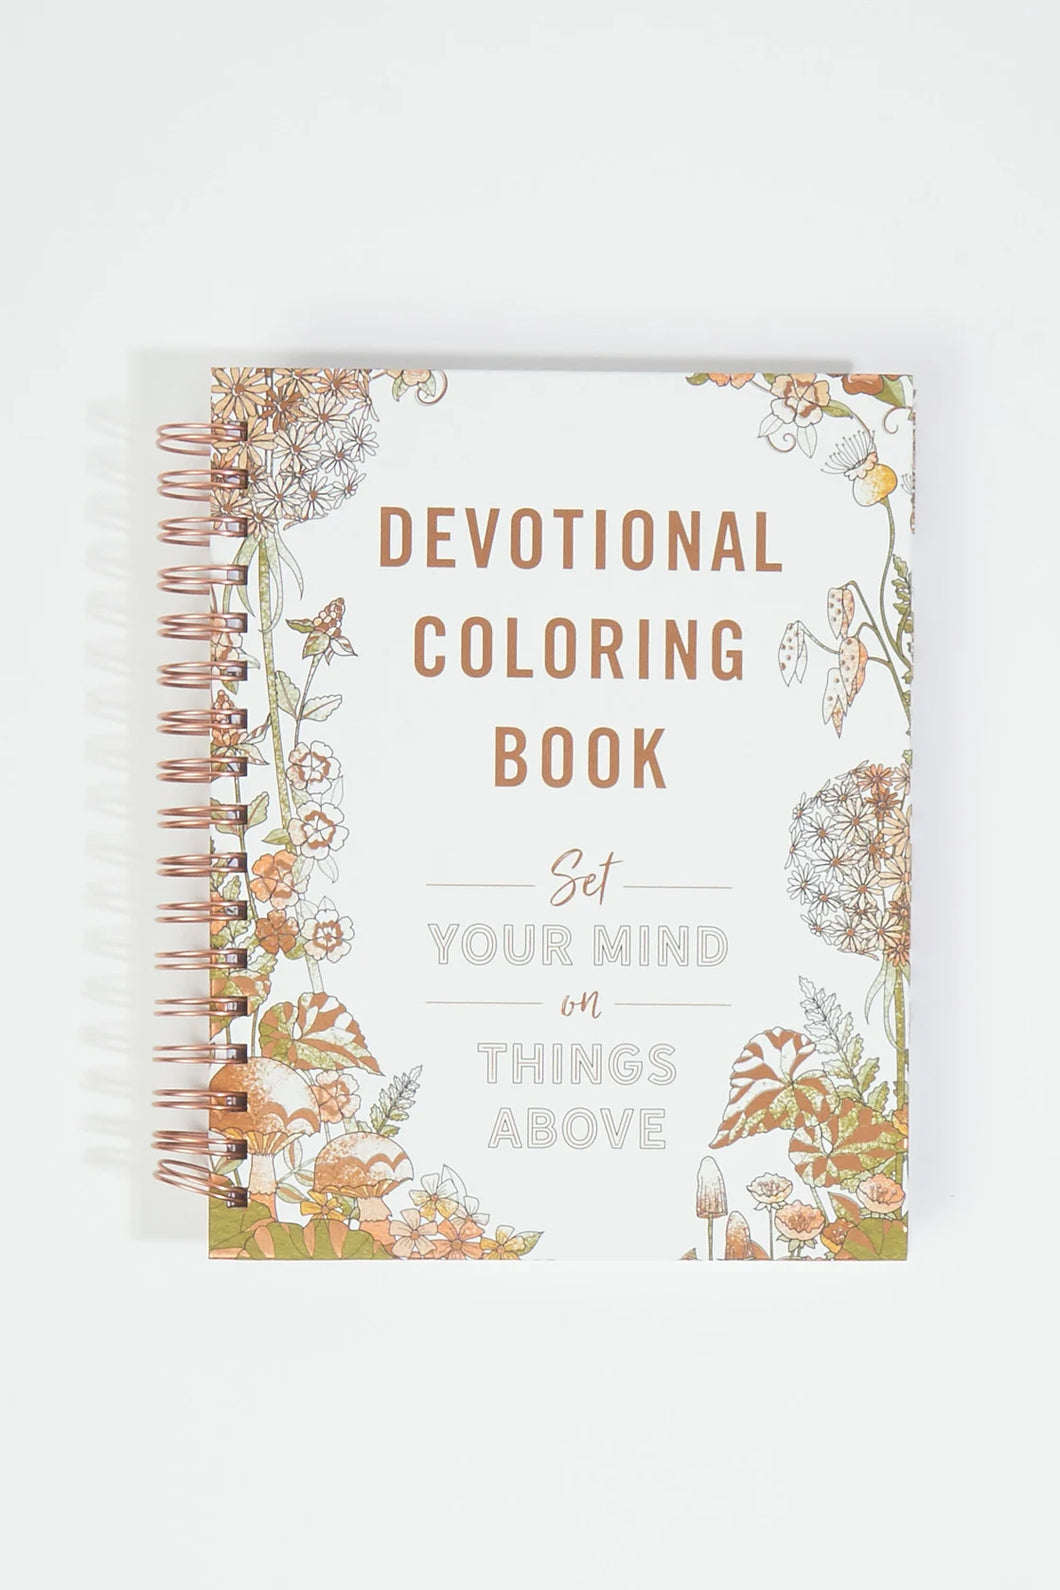 Set Your Mind On Things Above: A Devotional Coloring Book